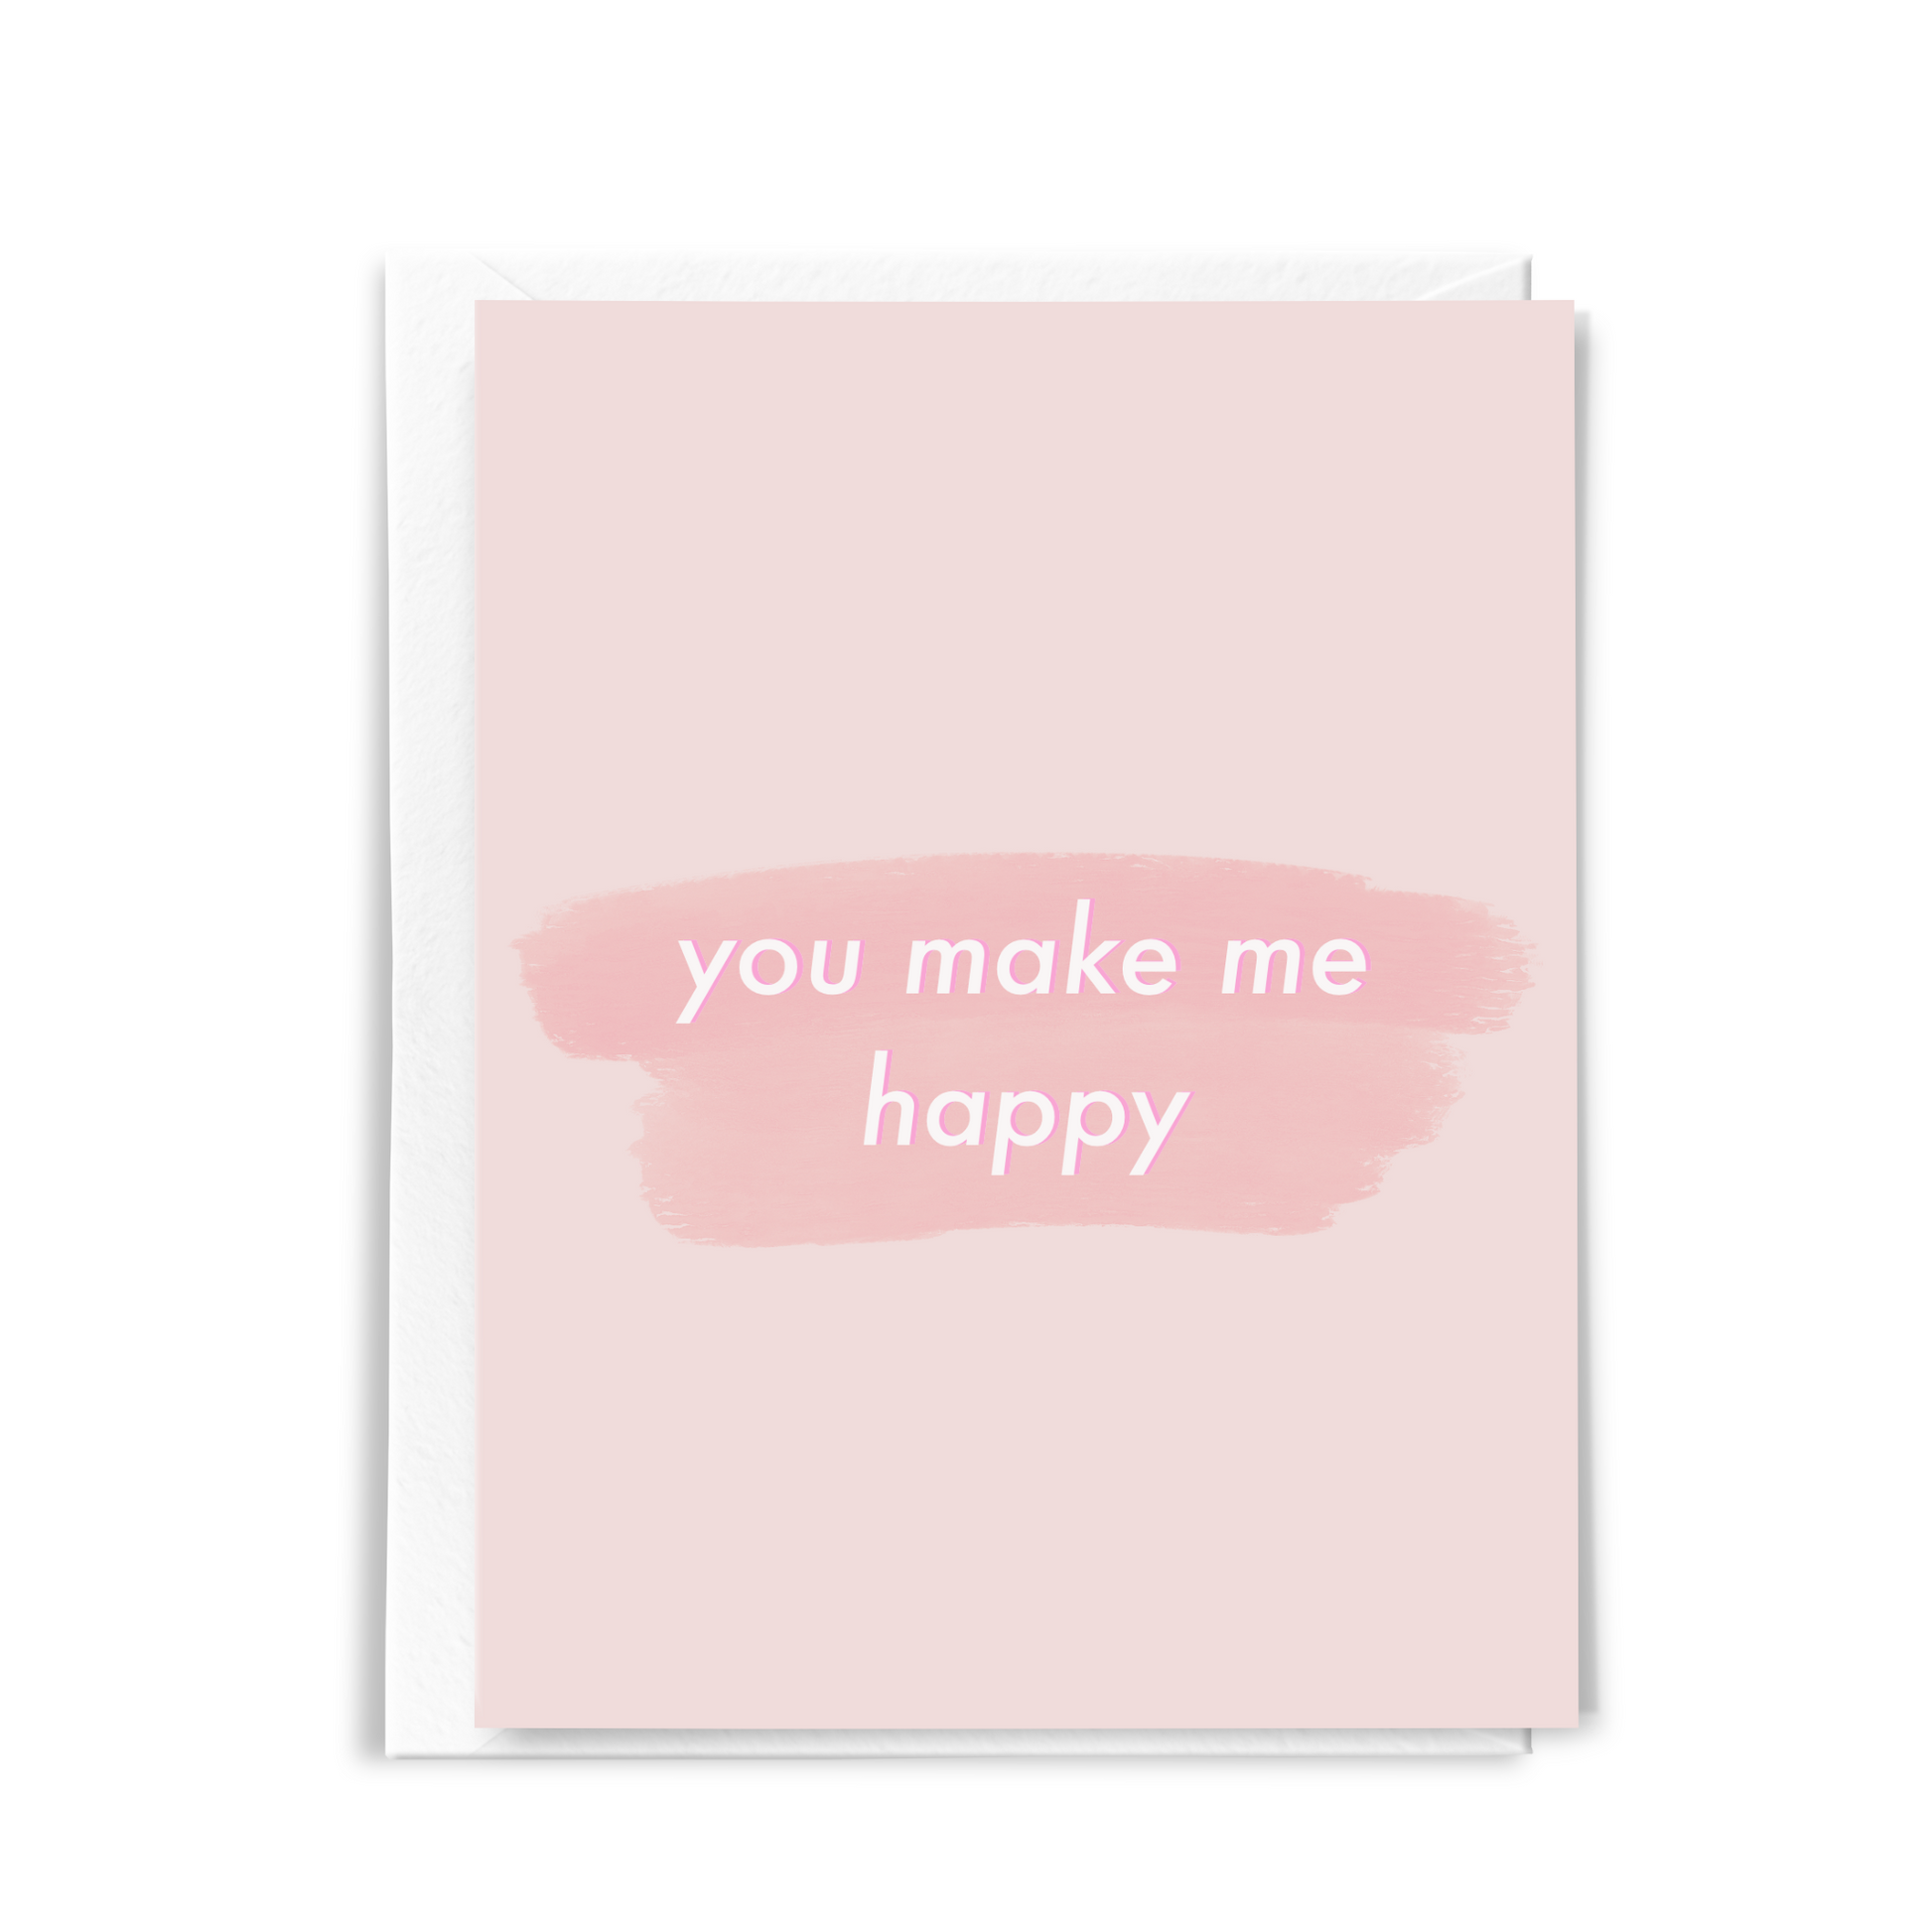 sweet love card on pink card